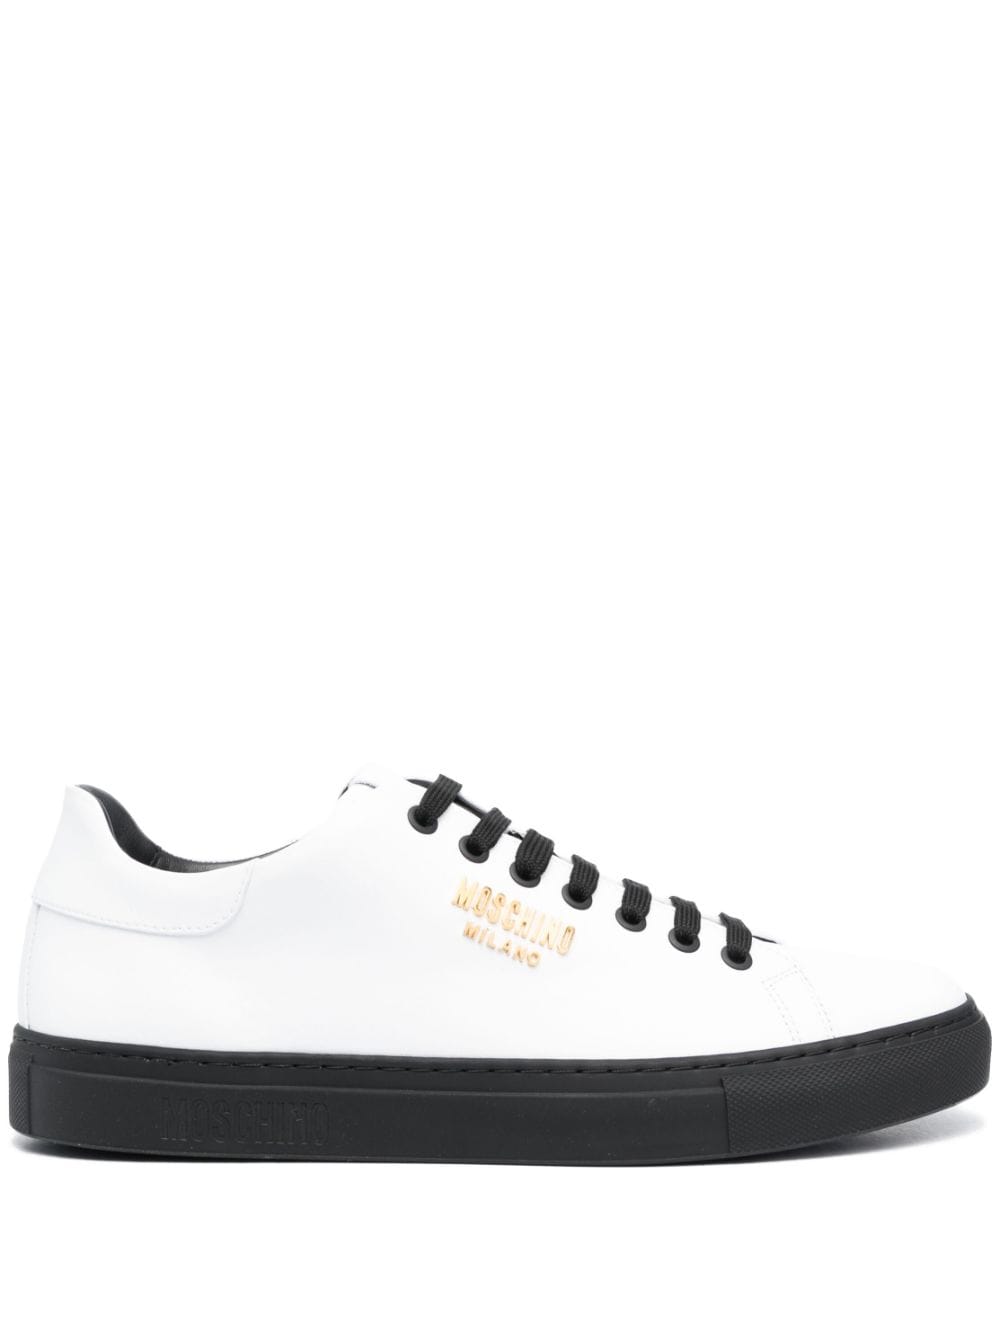 Moschino logo-plaque leather sneakers - White